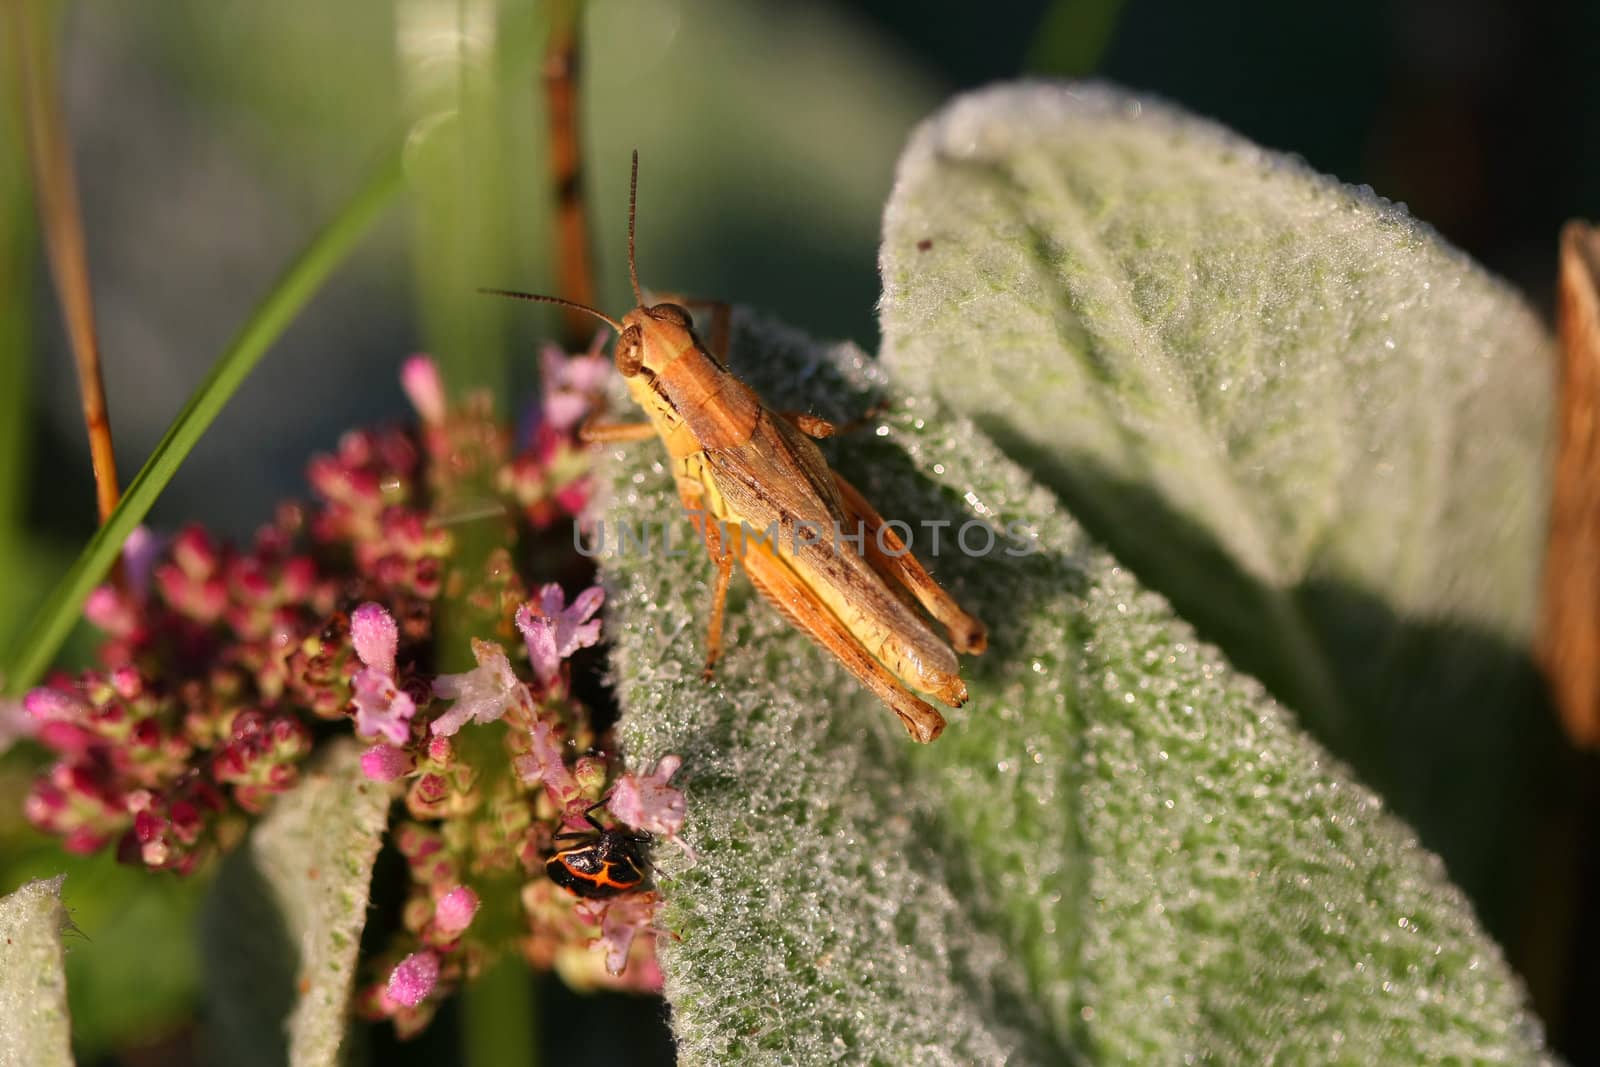 Grasshopper in early morning sun with dew on leaves